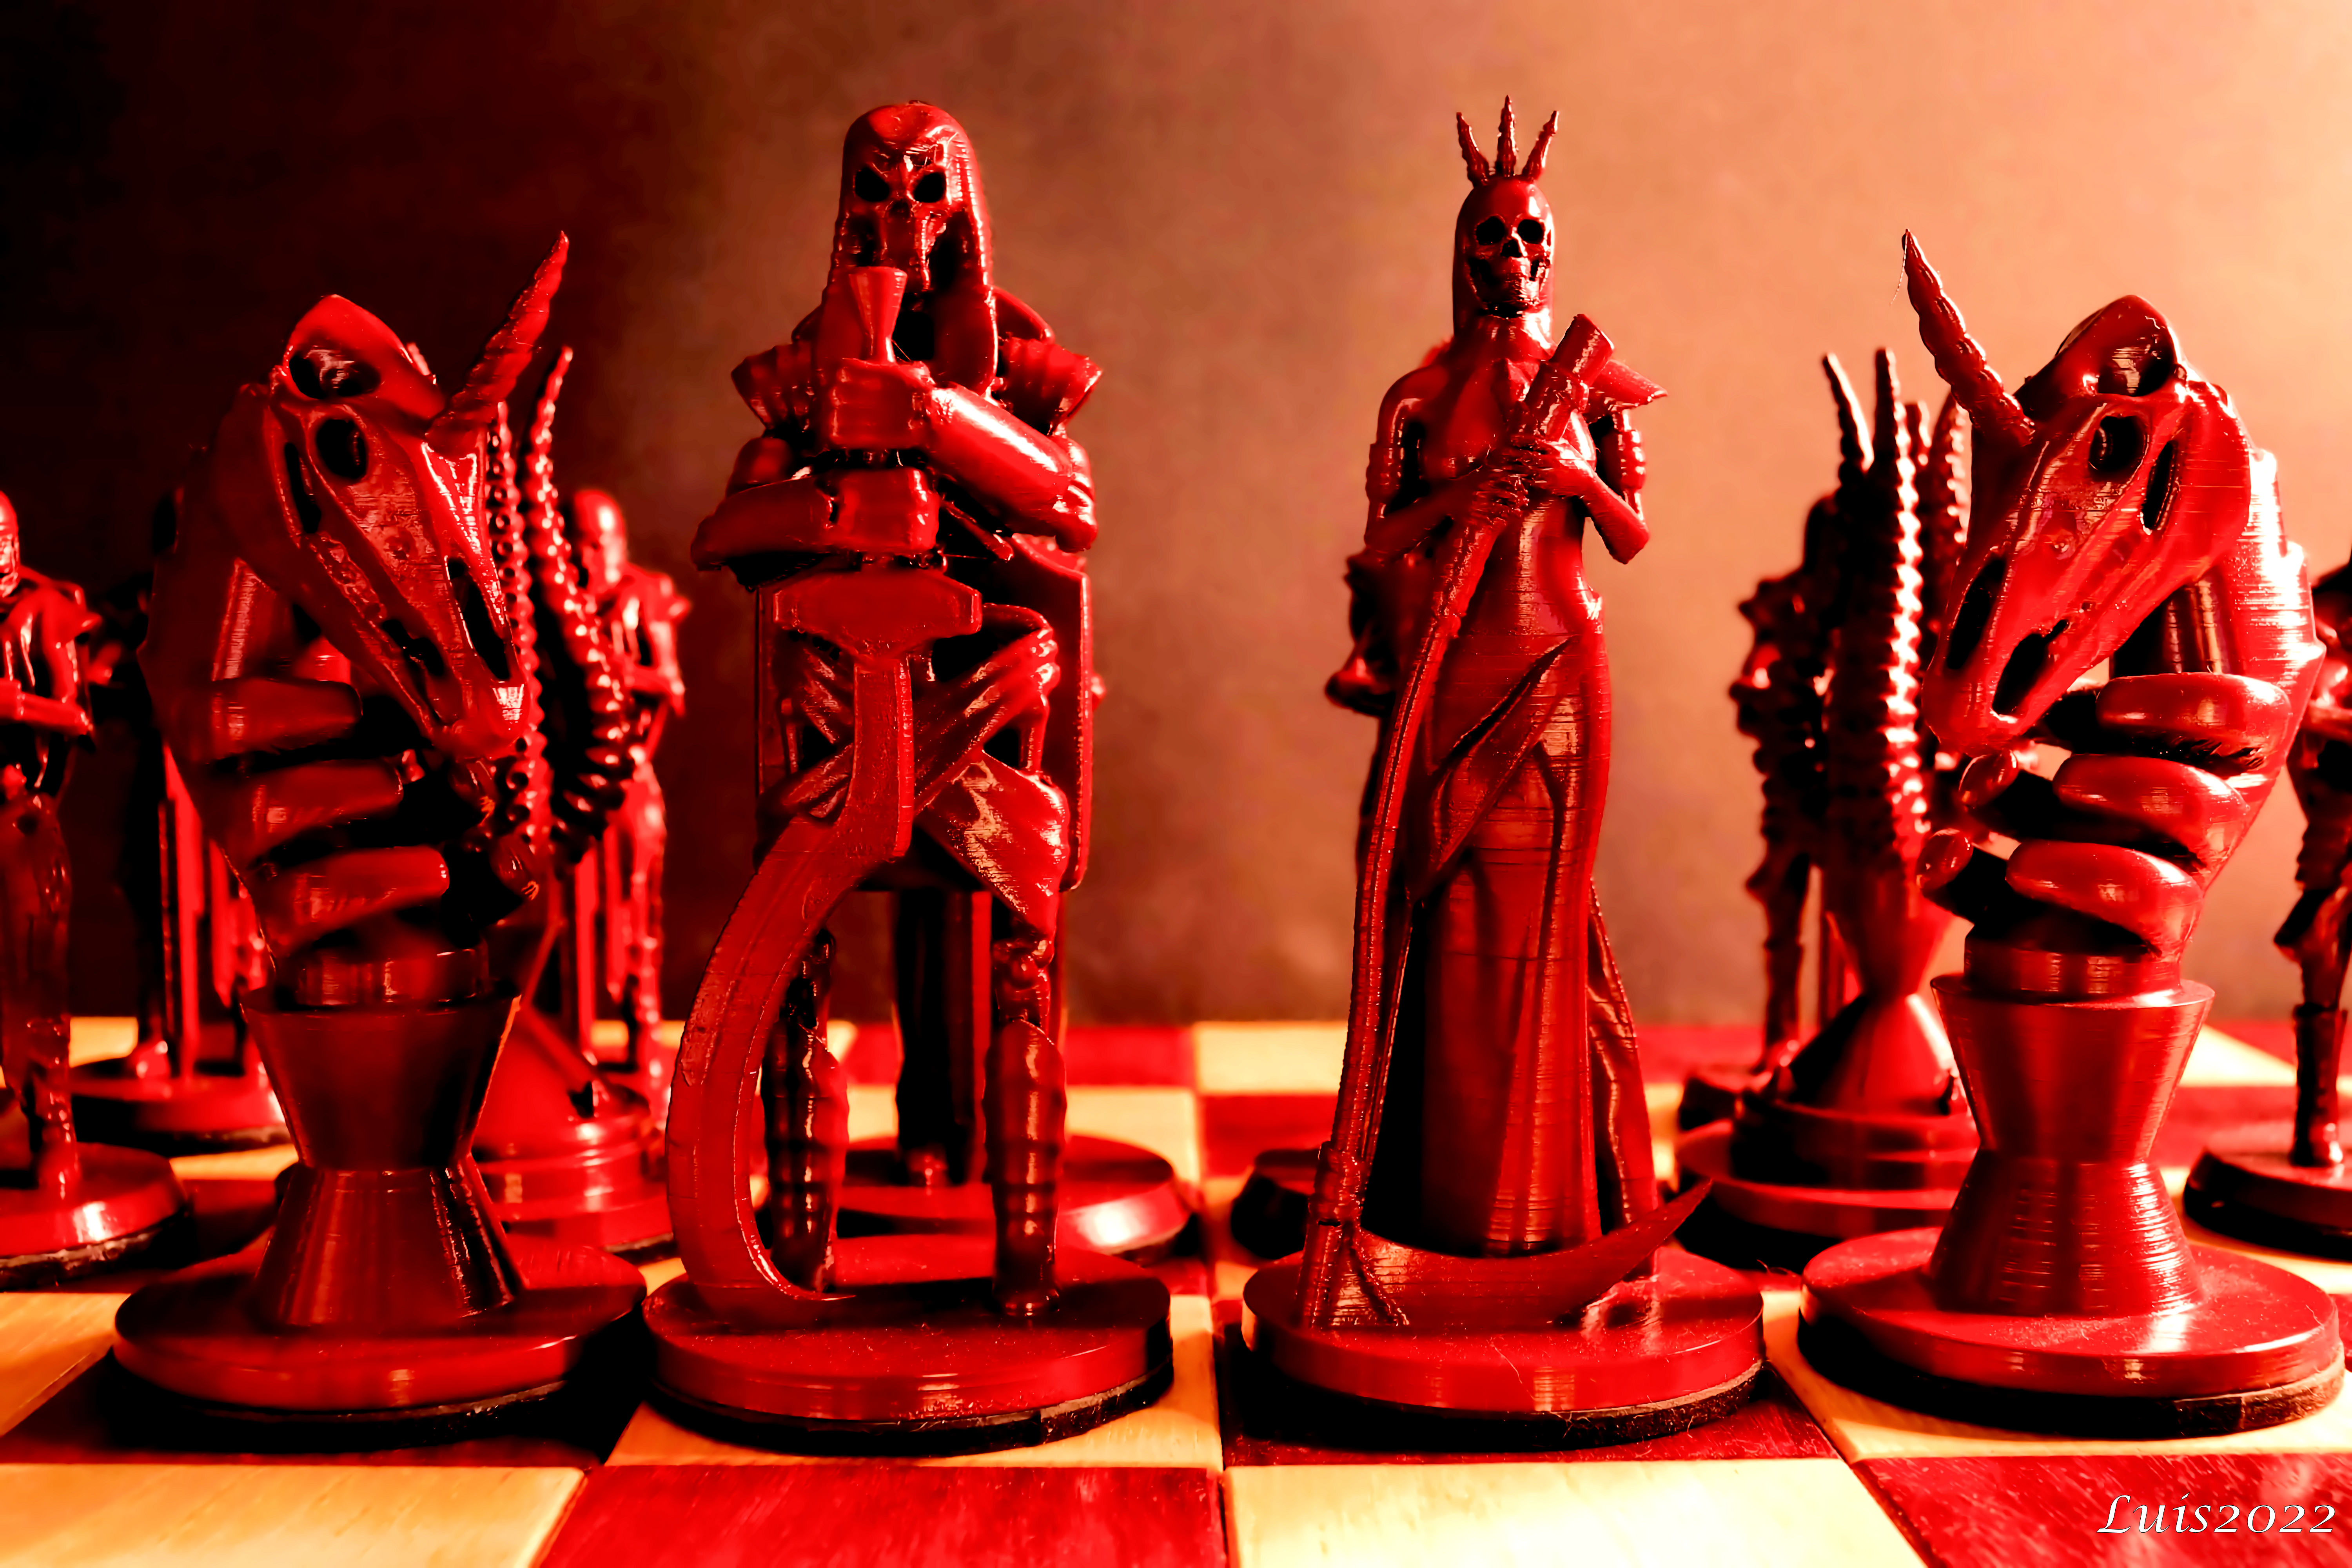 Custom Chess Sets - Chess Forums 